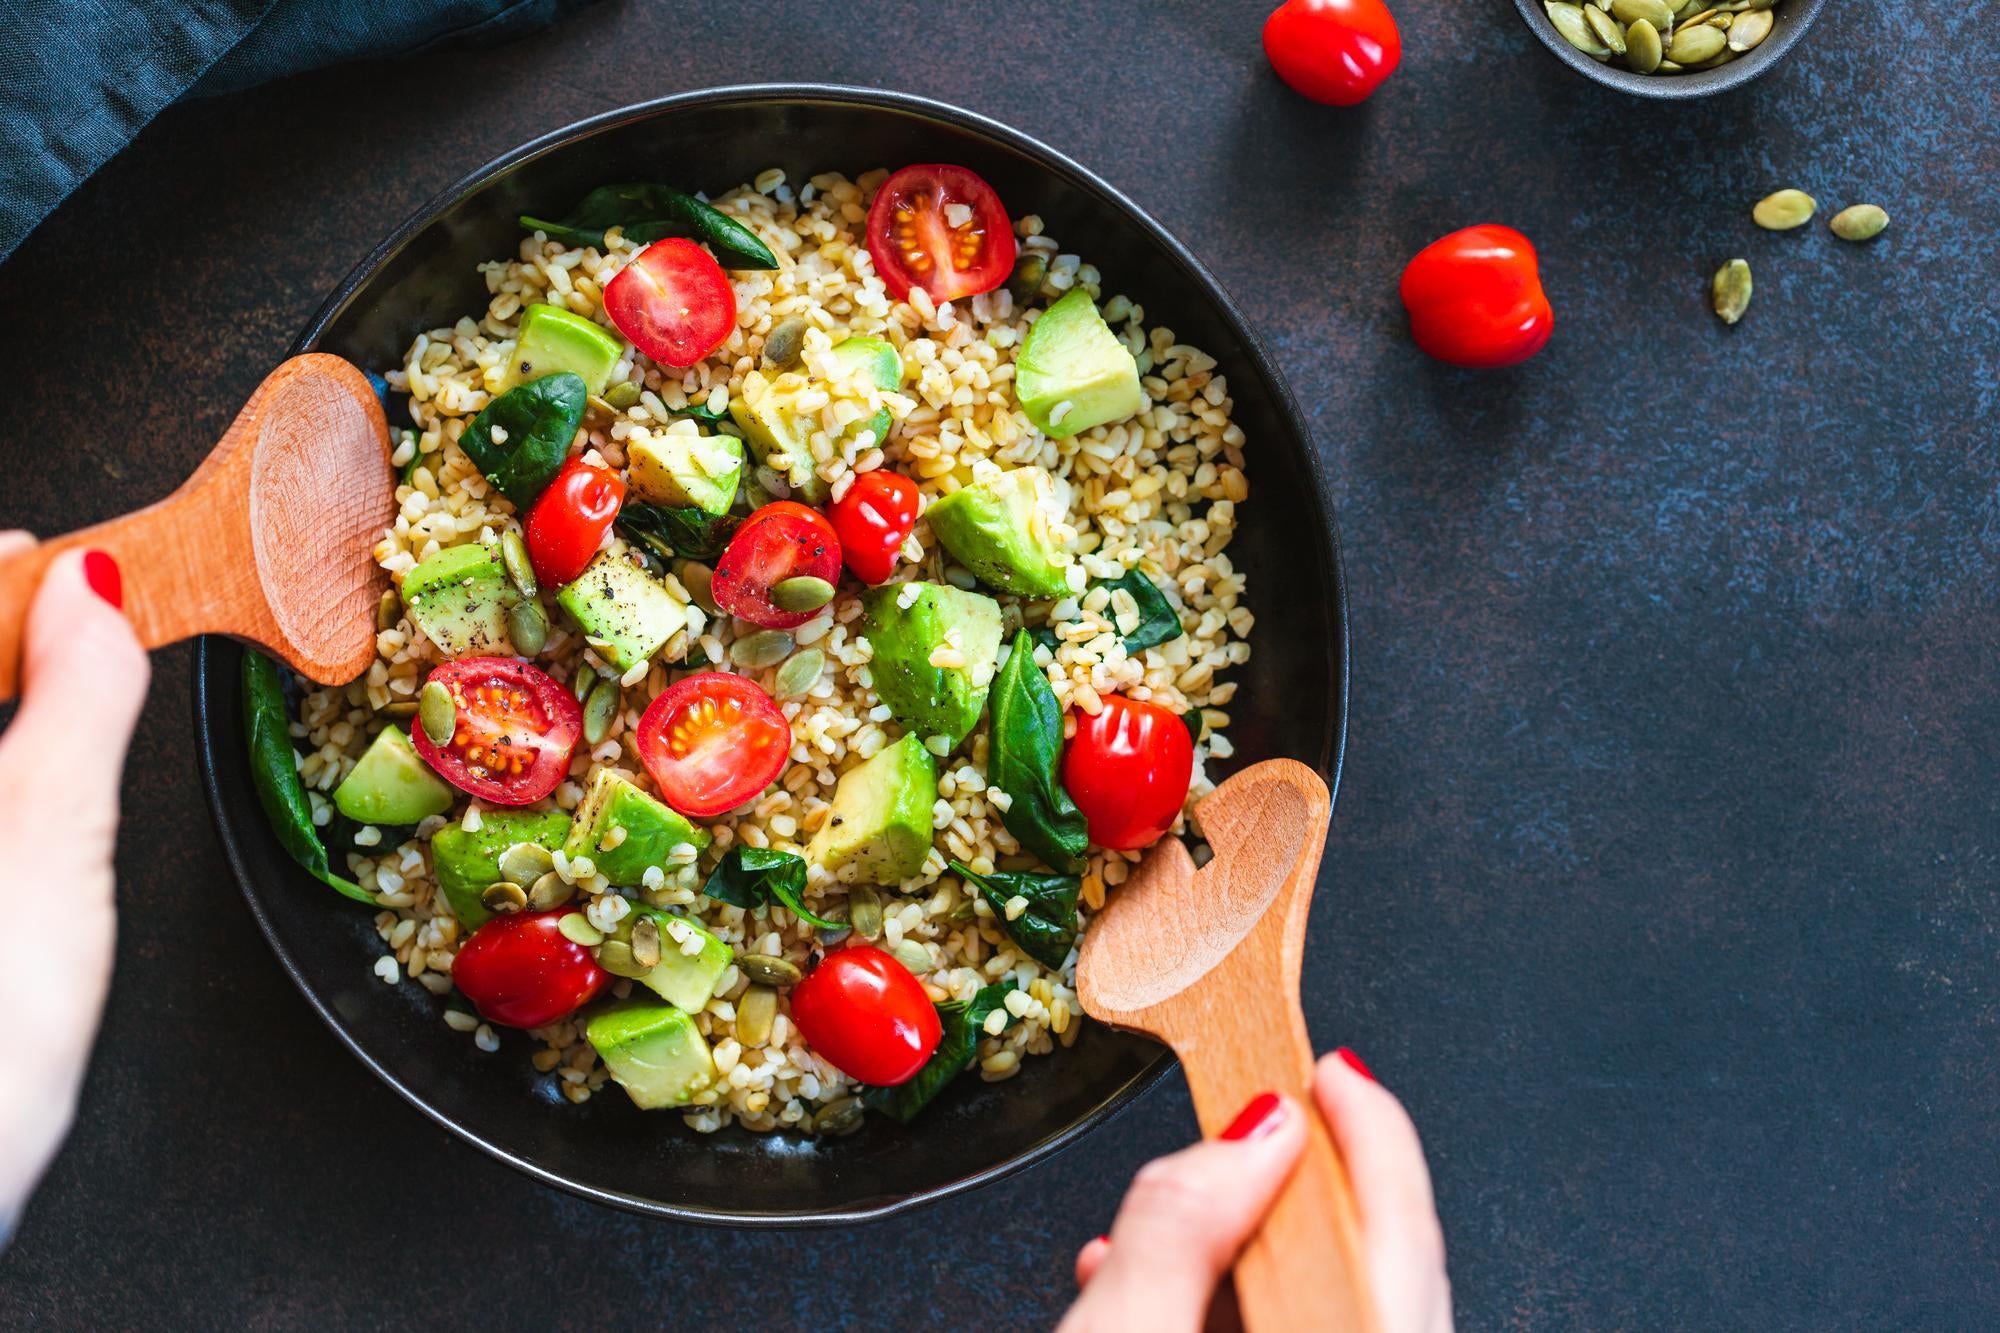 Wholesome and Vibrant: Einkorn Wheat Berry Salad